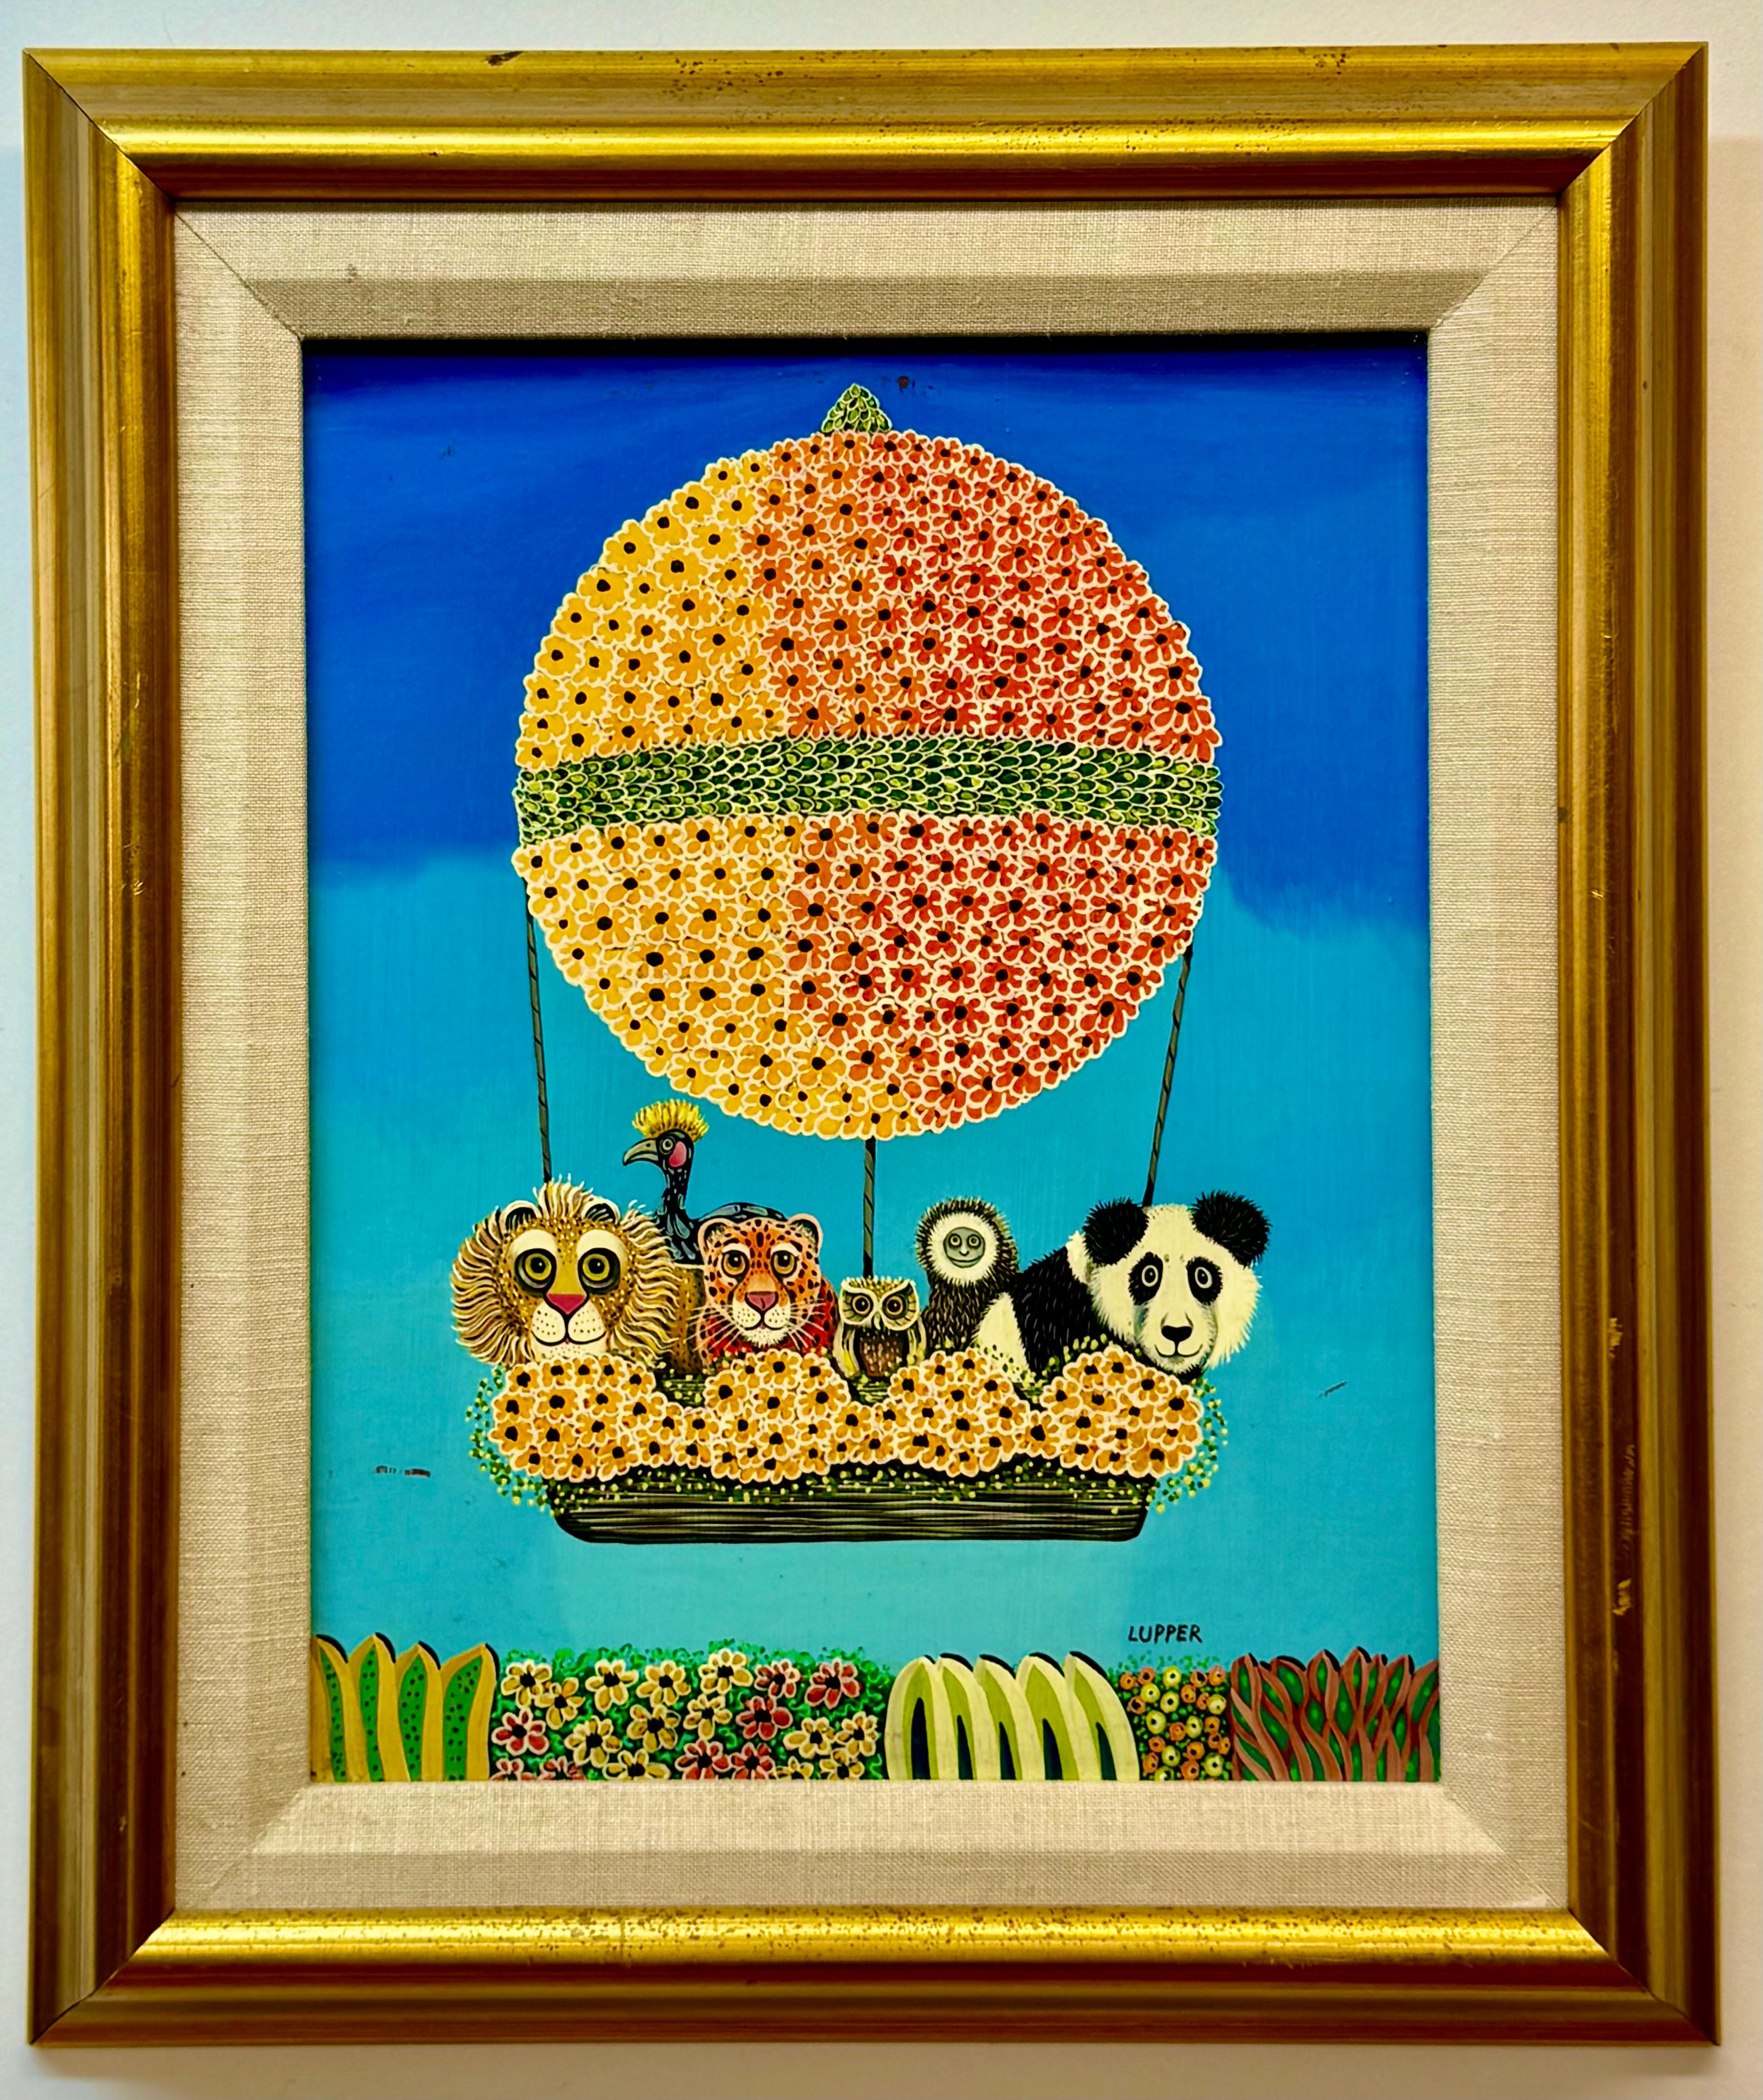 Edward Lupper (1936-2016) whimsical illustration, painting of animals in a hot air balloon by listed California artist. 11 x 14 unframed, 16 x 19 framed.